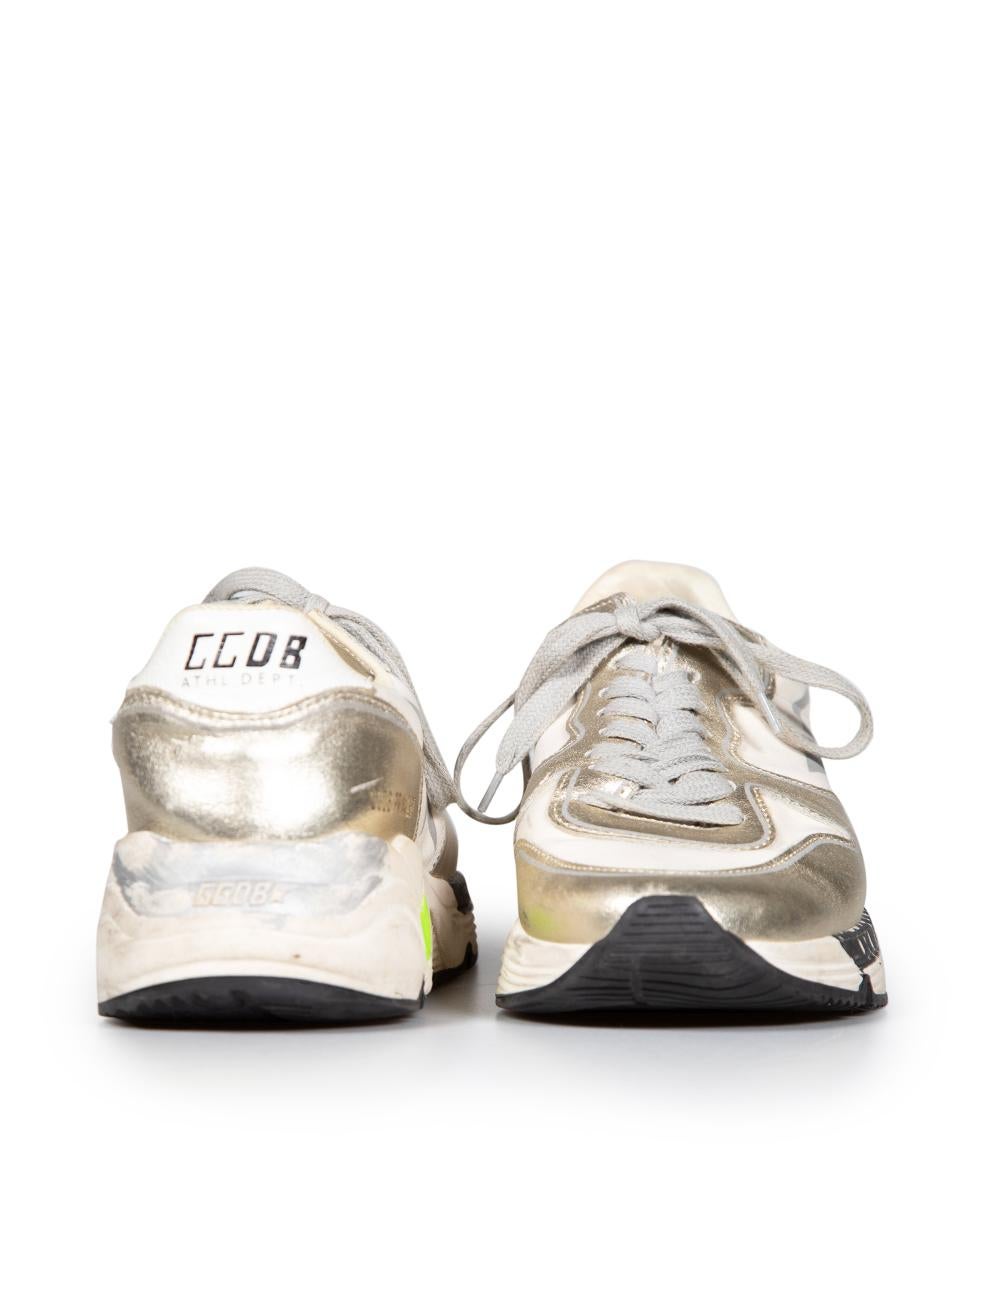 Golden Goose Metallic Private EDT Running Trainers Size IT 38 In Good Condition For Sale In London, GB